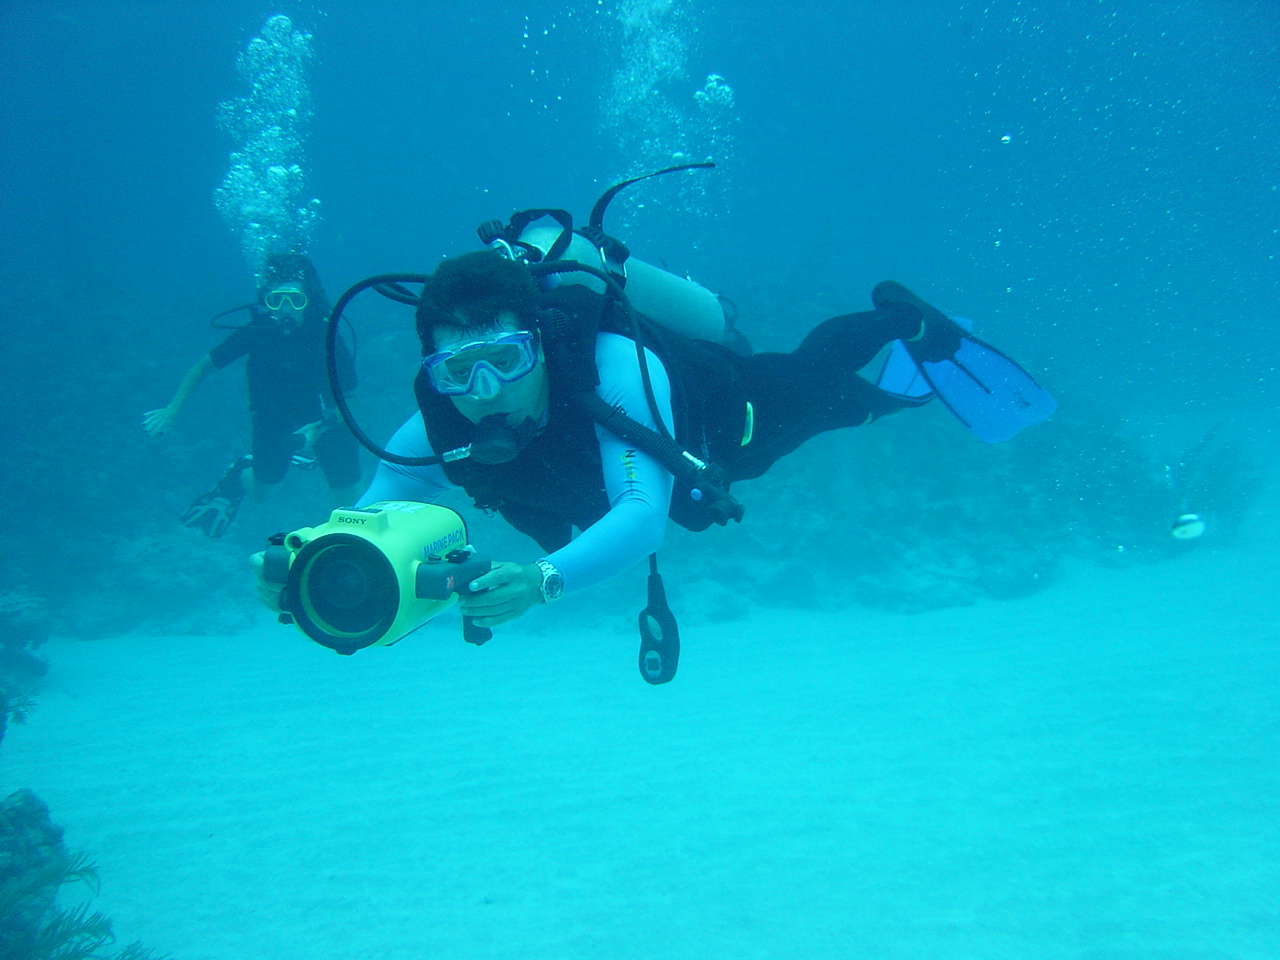 Kenneth-DP- Filming Underwater PADI Certified Scuba Rescue Diver